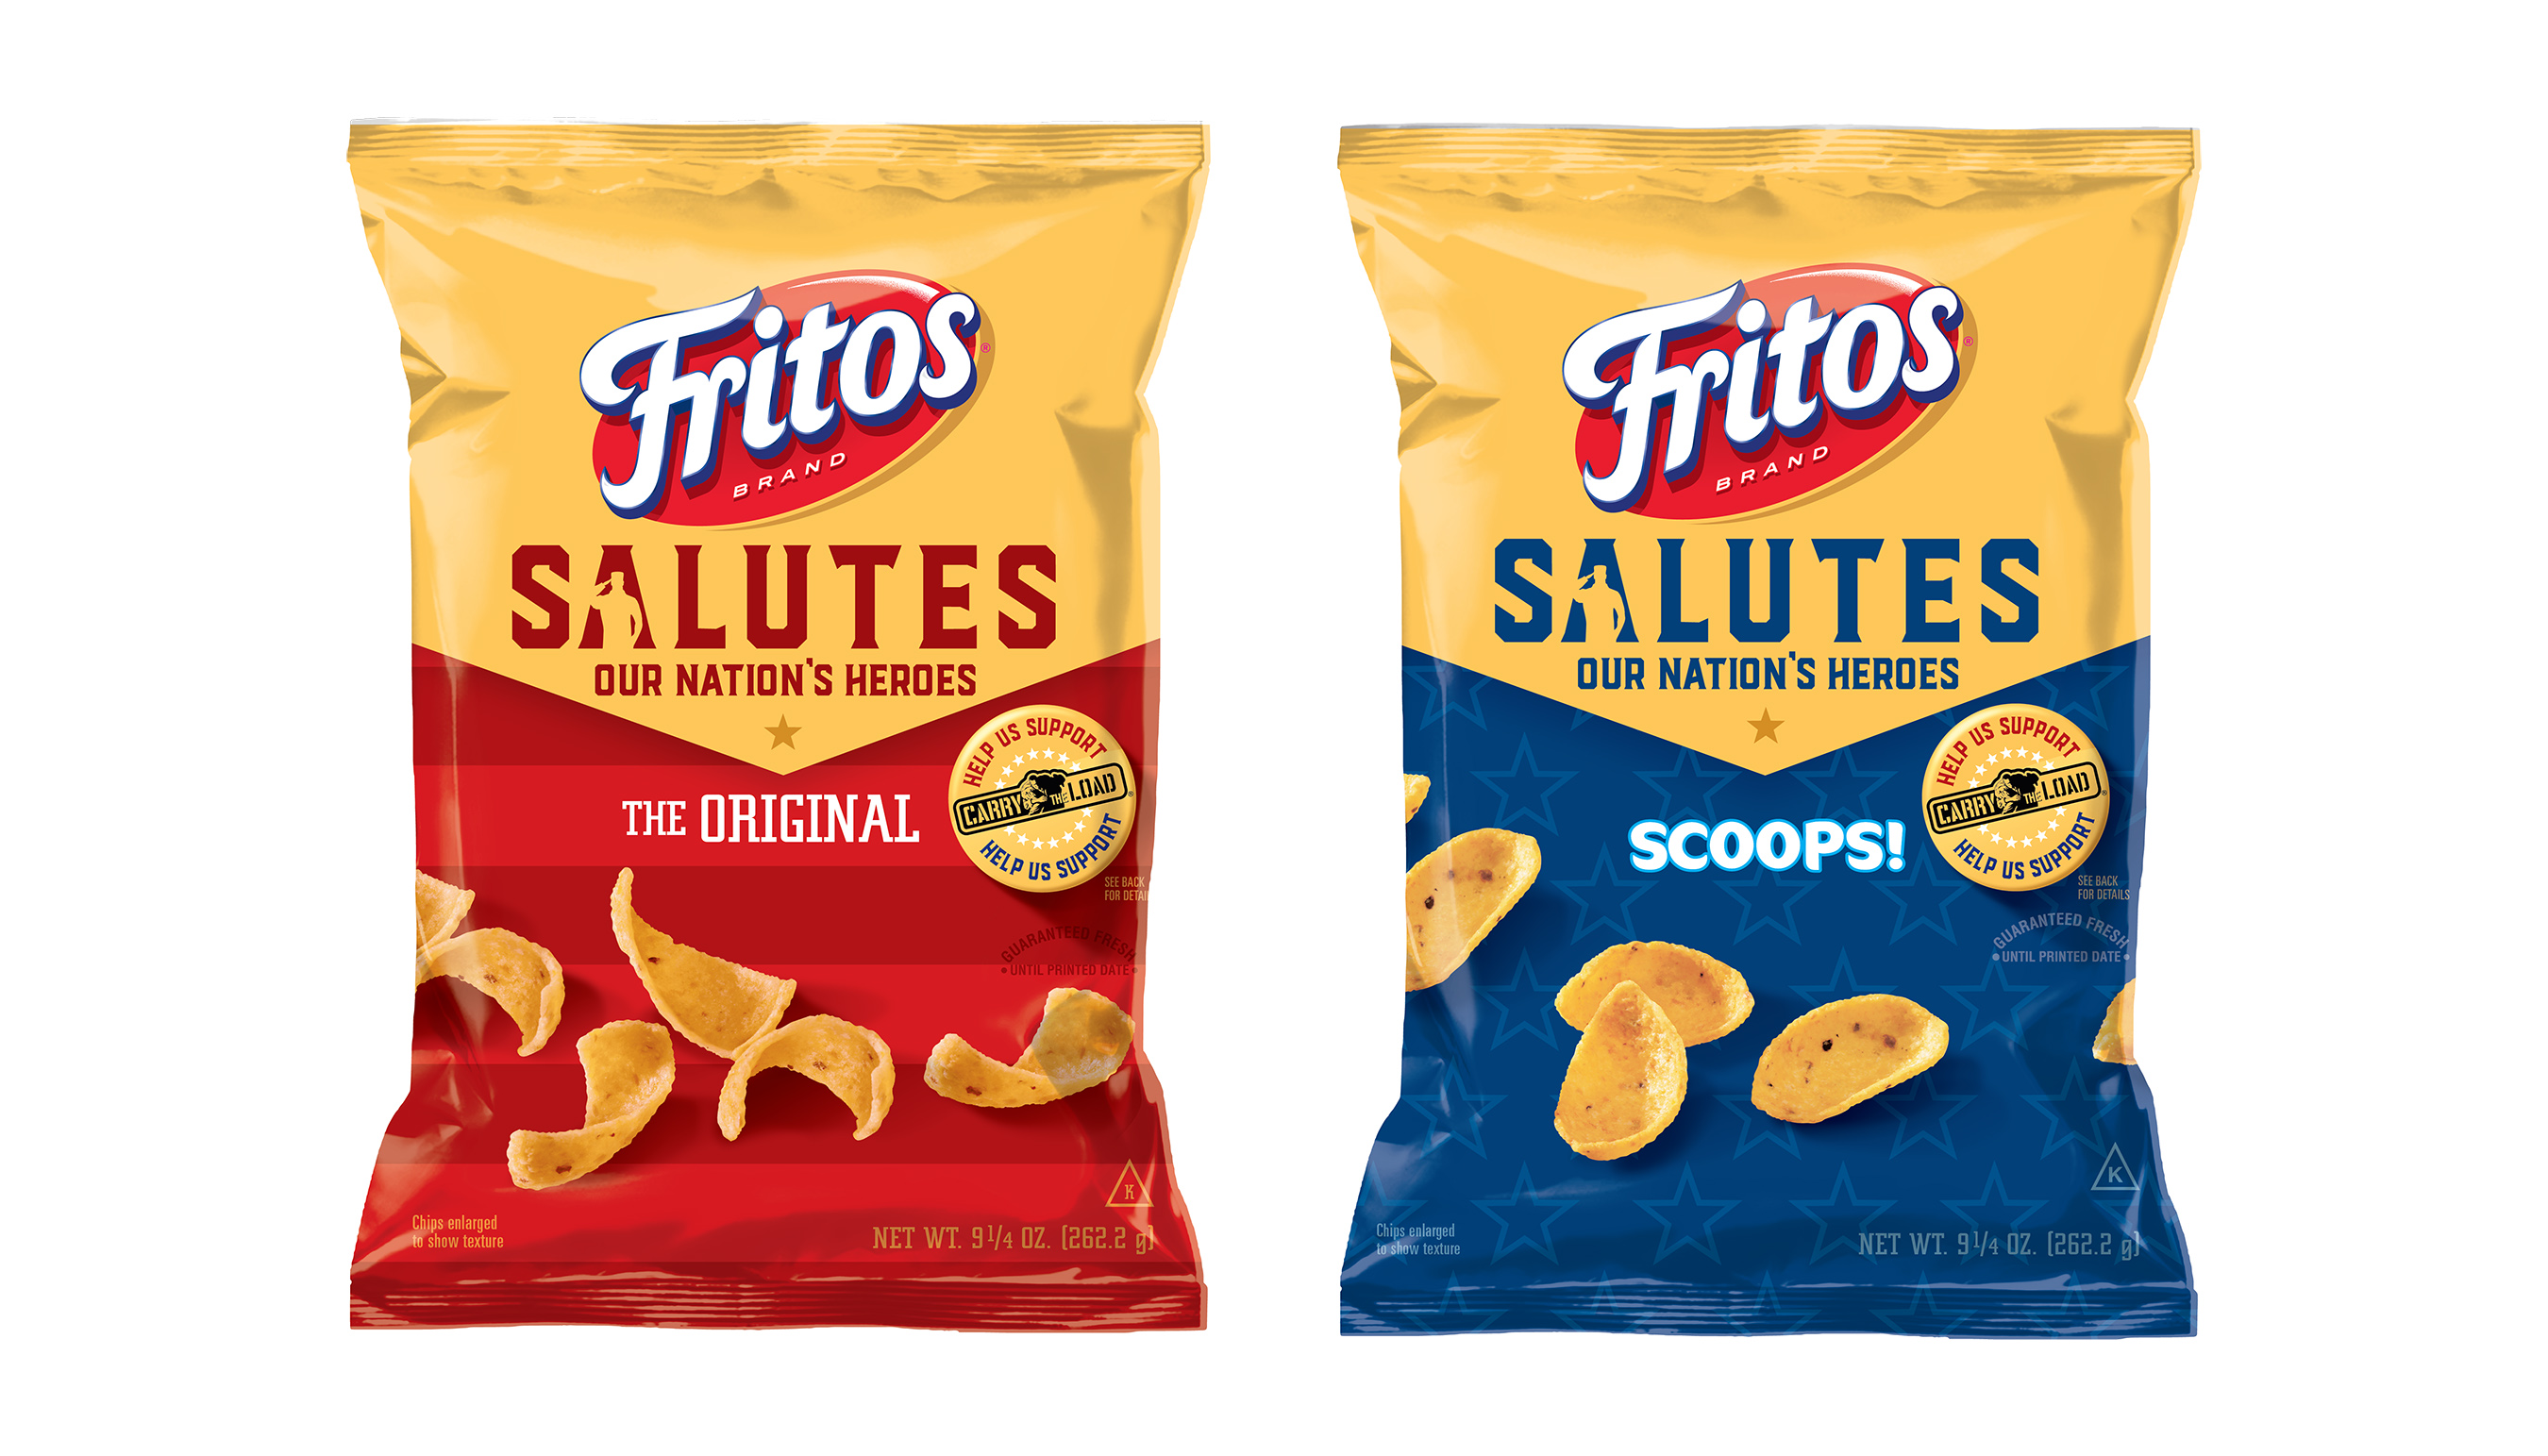 Fritos® is teaming up with Carry The Load to produce nearly 22 million specially-marked bags, representing members who have served in the American military throughout history (including active-duty).